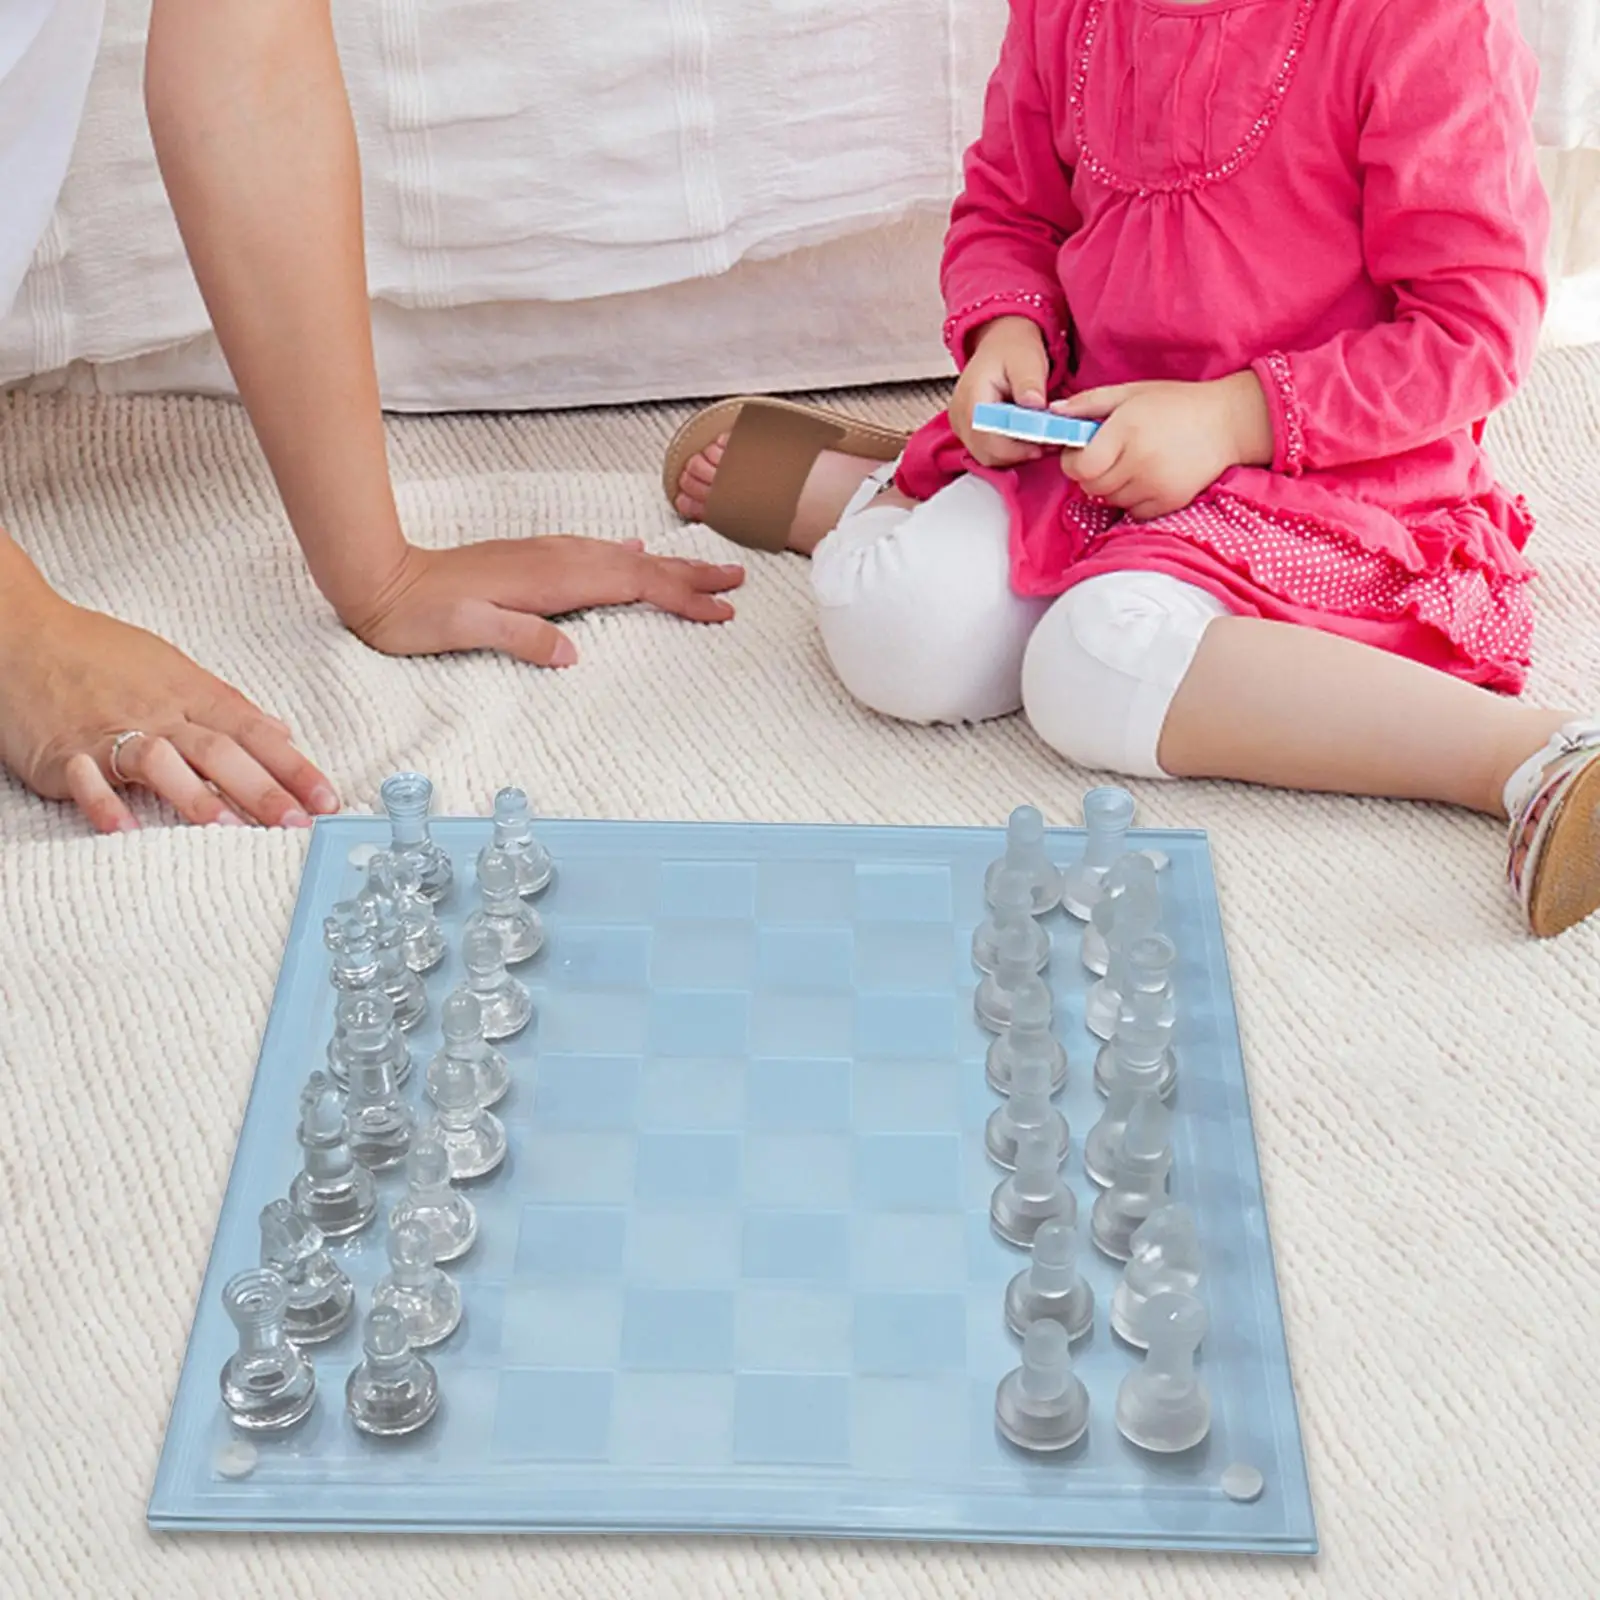 Classic Strategy Game Frosted Chess Board Set for Trips Camping Picnics